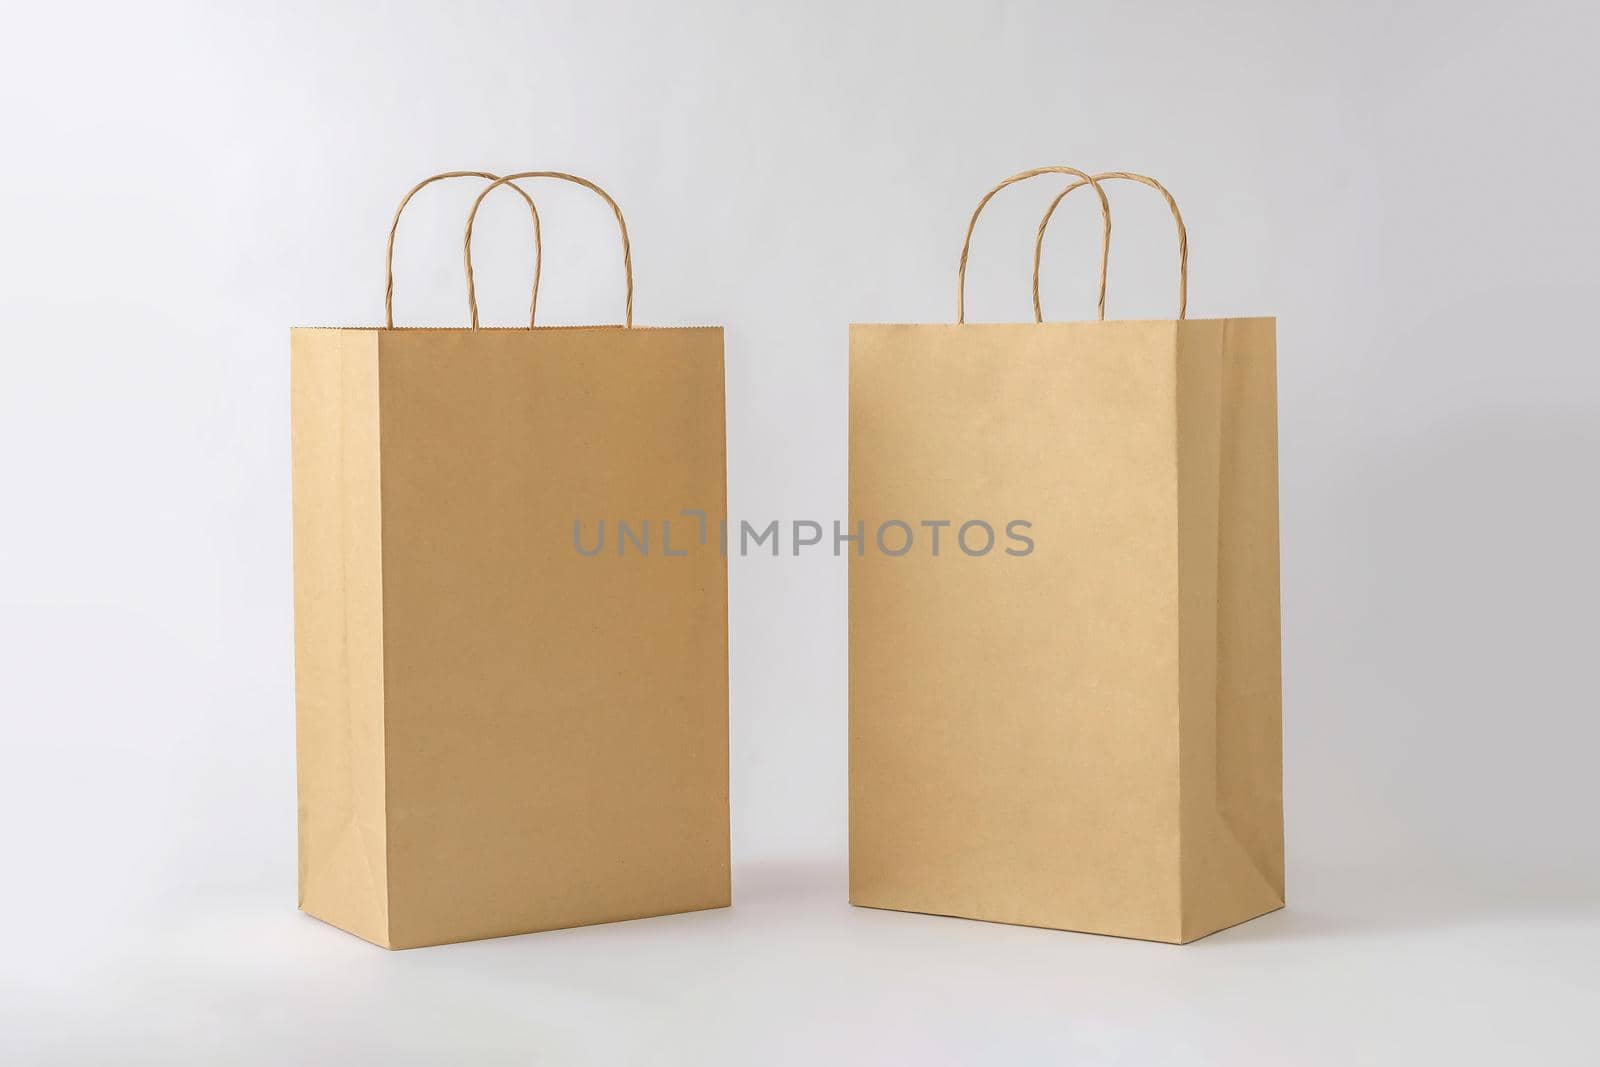 Two blank paper cardboard container packs for commercial shopping by sergii_gnatiuk